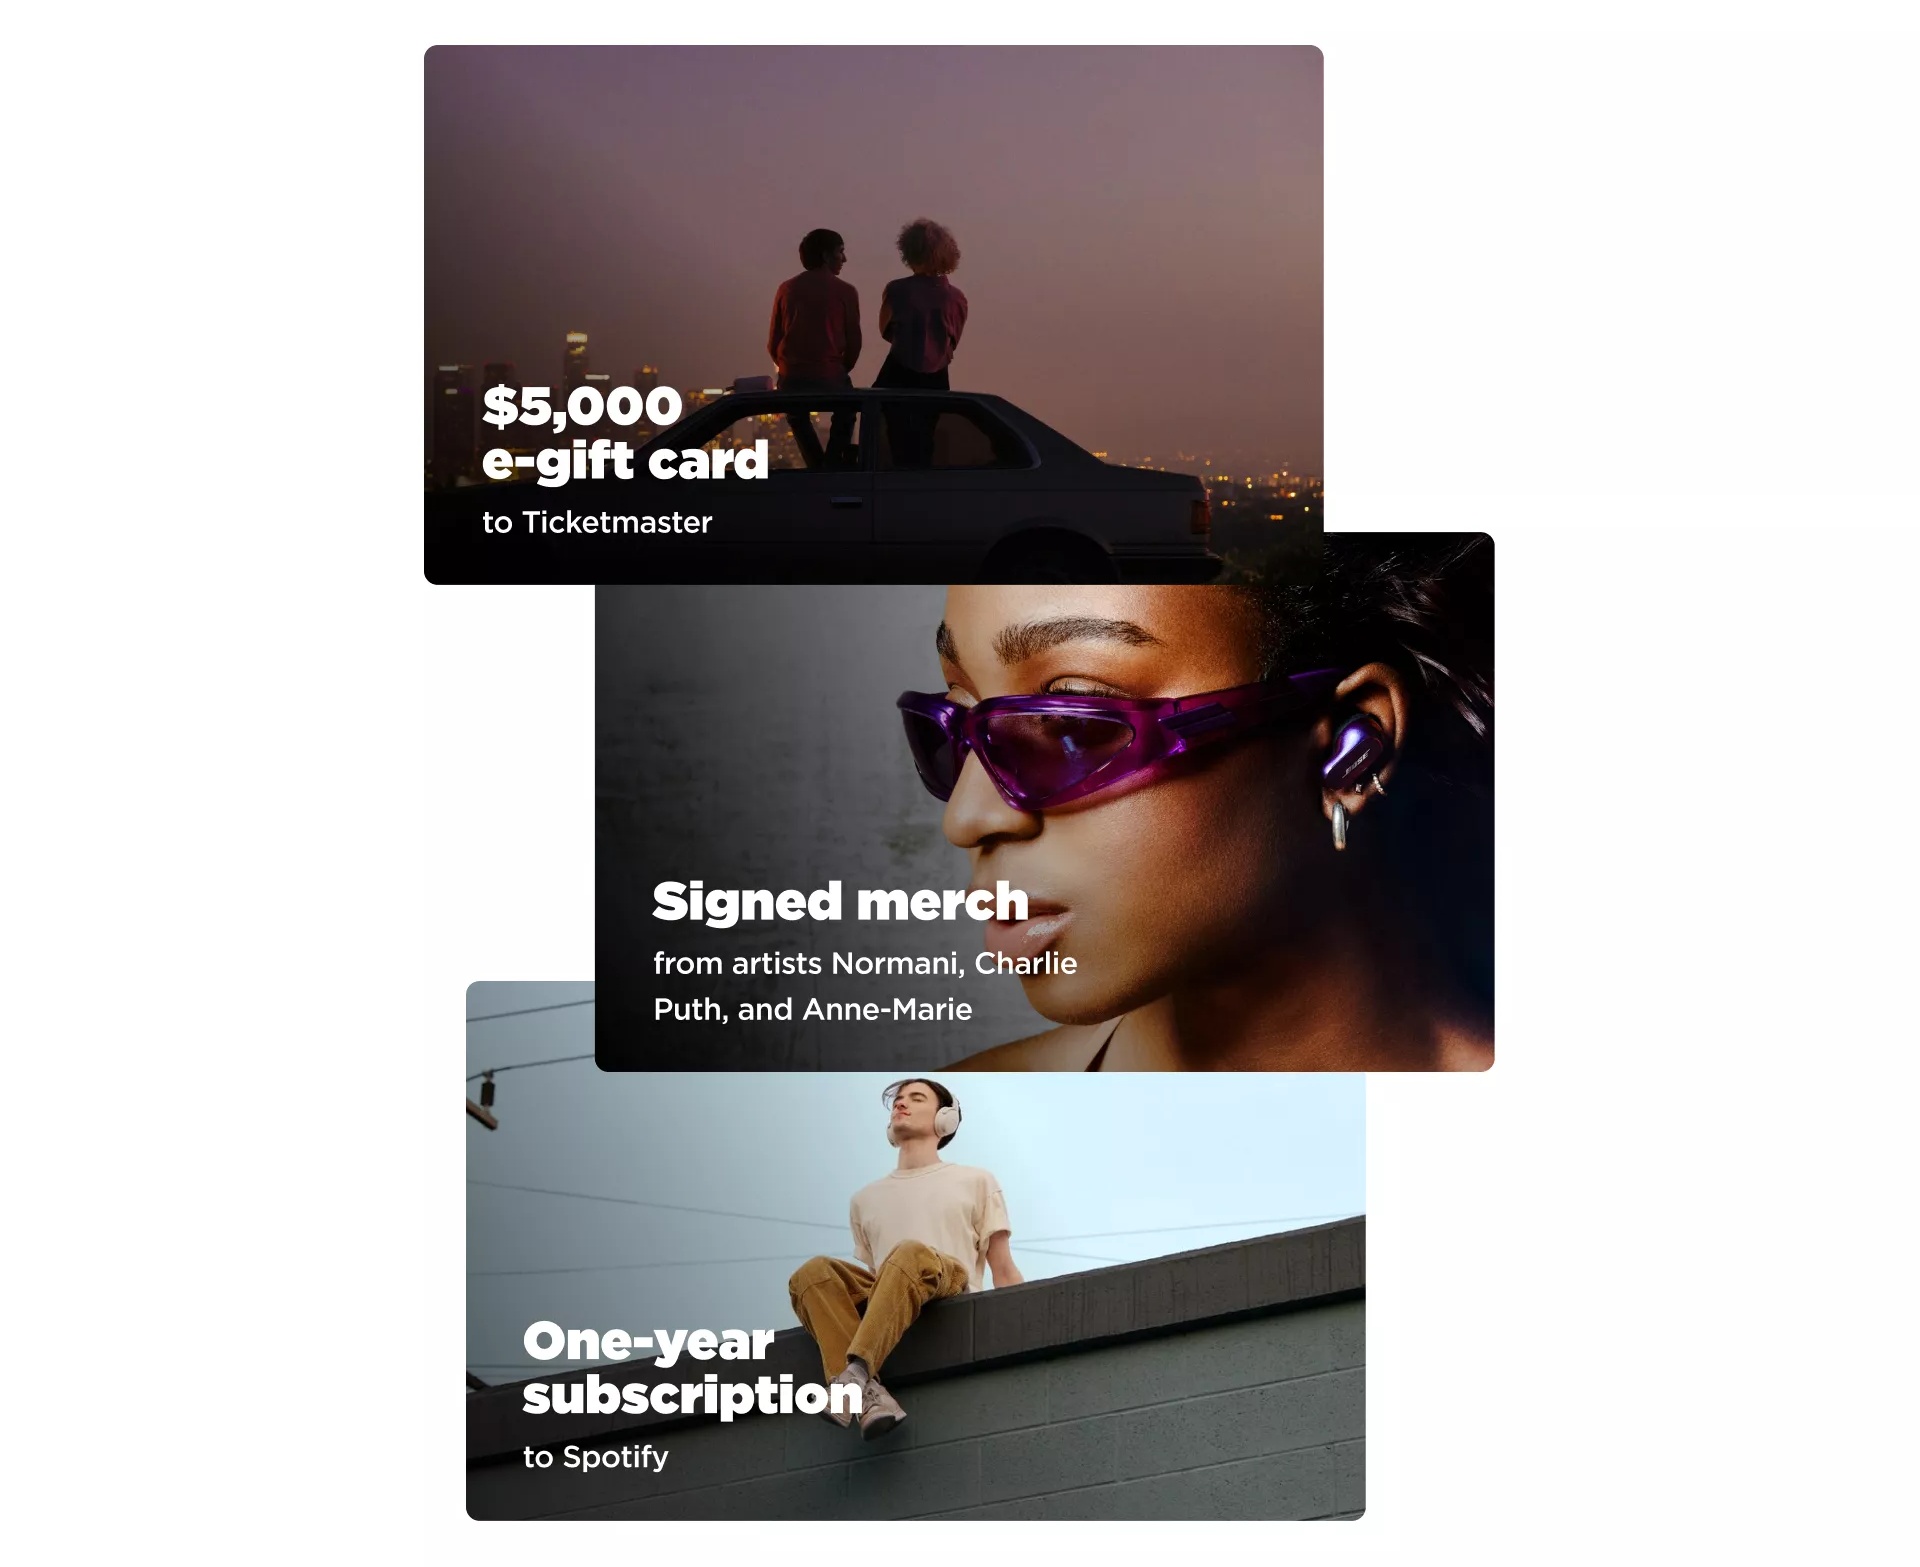 $5,000 e-gift card to Ticketmaster, signed merch from artists Normani, Charlie Puth, and Anne-Marie, and one-year subscription to Spotify